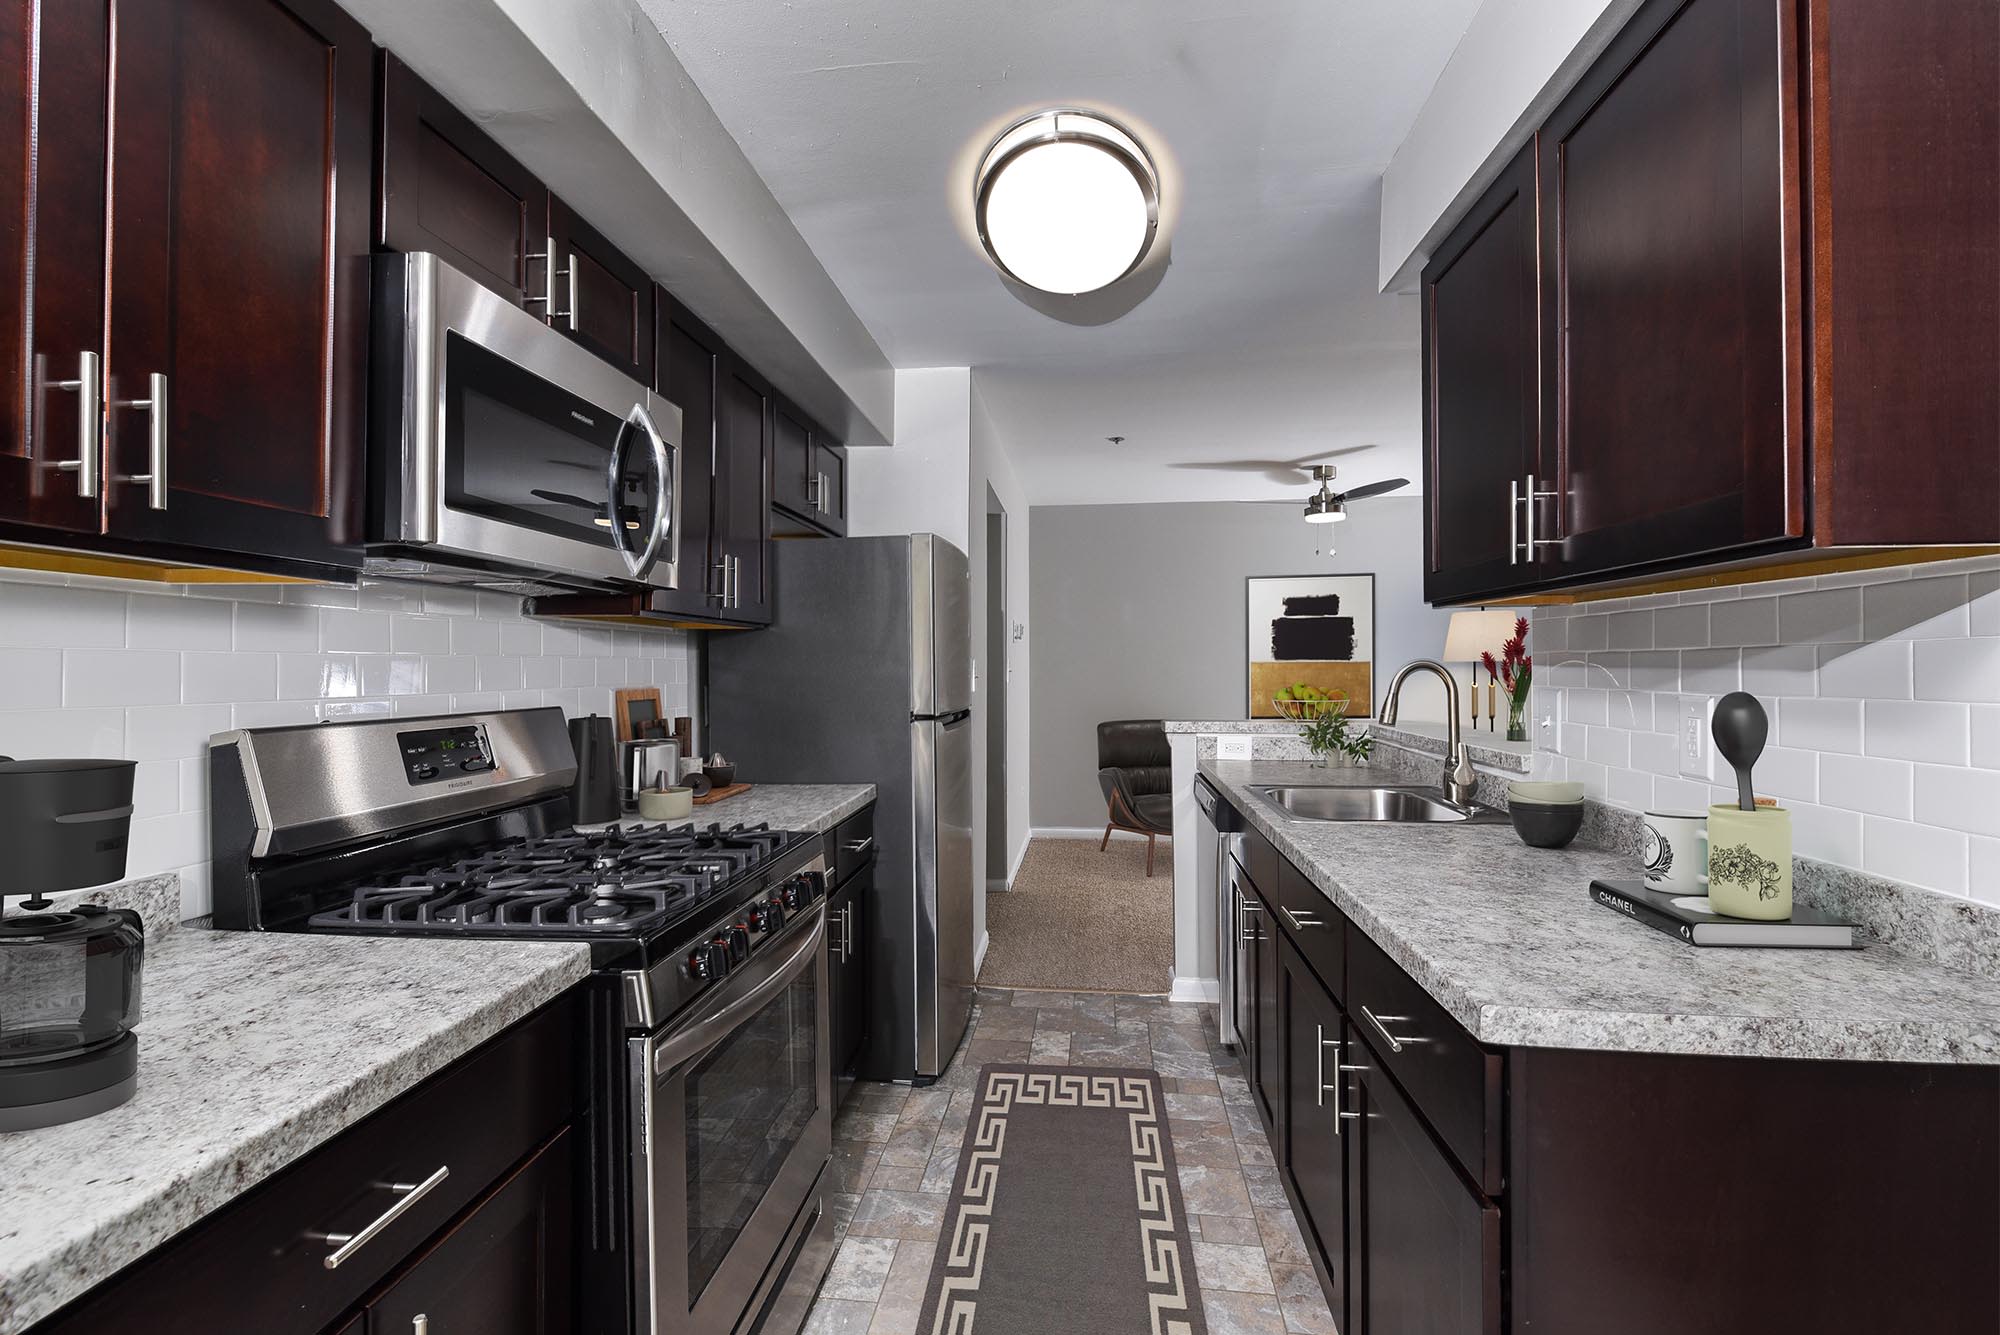 Model kitchen with appliance at Yorkshire Apartments, Silver Spring, Maryland